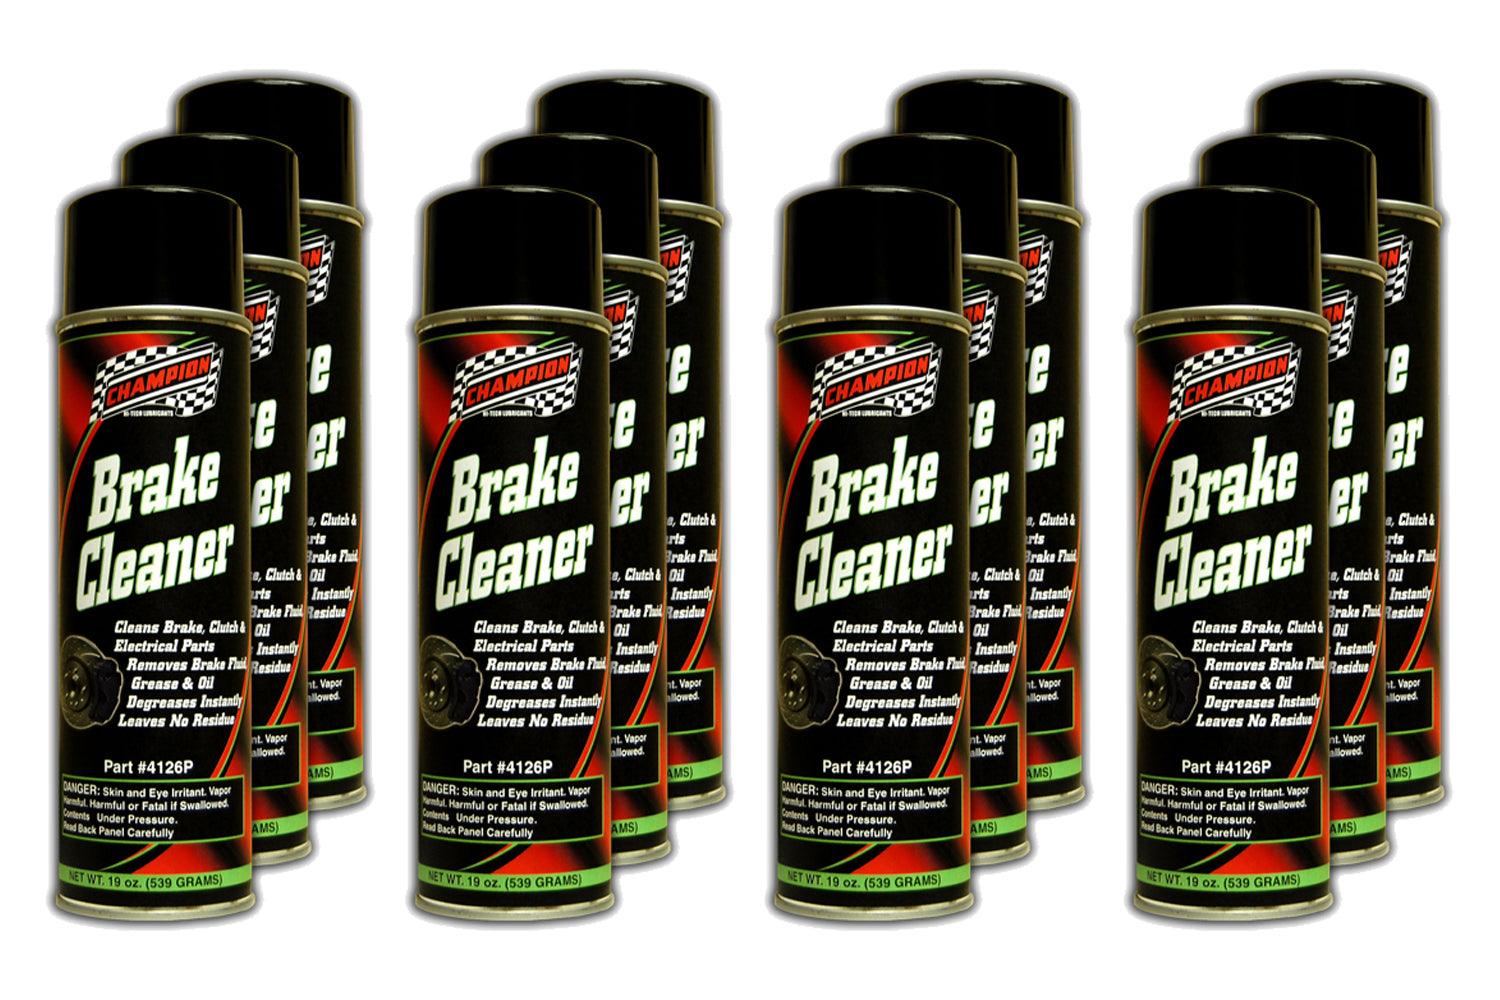 Brake Cleaner Chlorinate d Case 12x19oz Cans - Burlile Performance Products